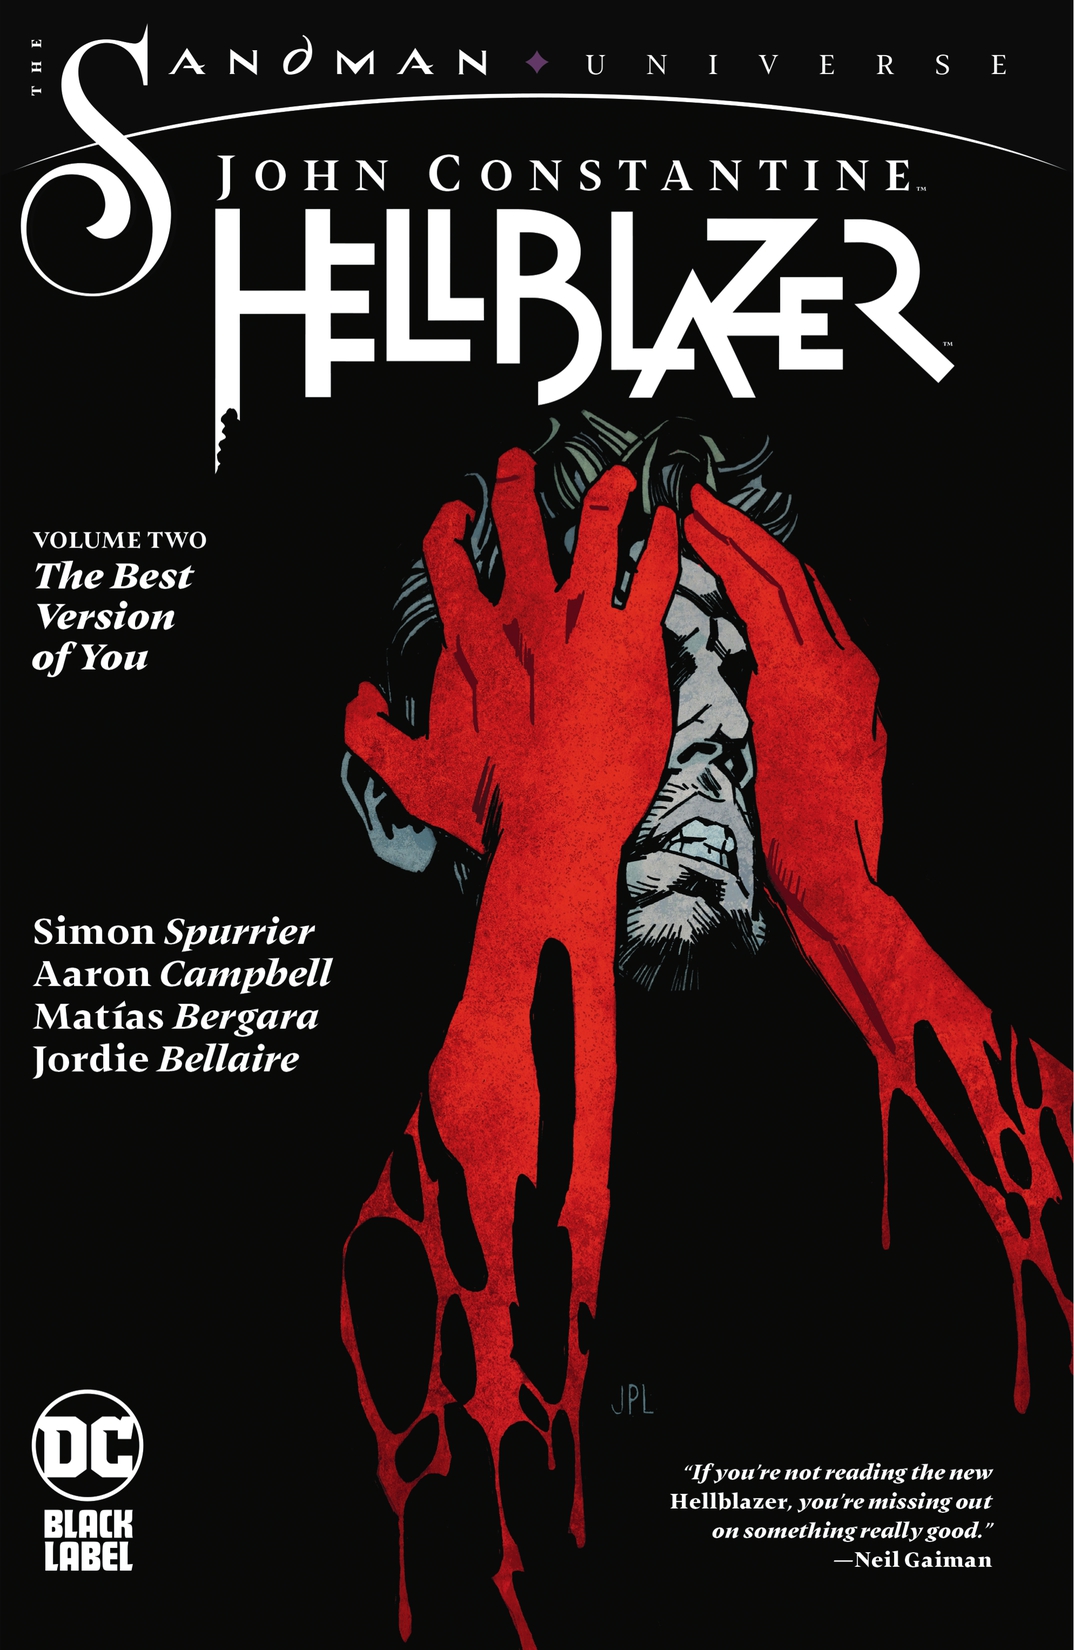 John Constantine, Hellblazer Vol. 2: The Best Version of You preview images